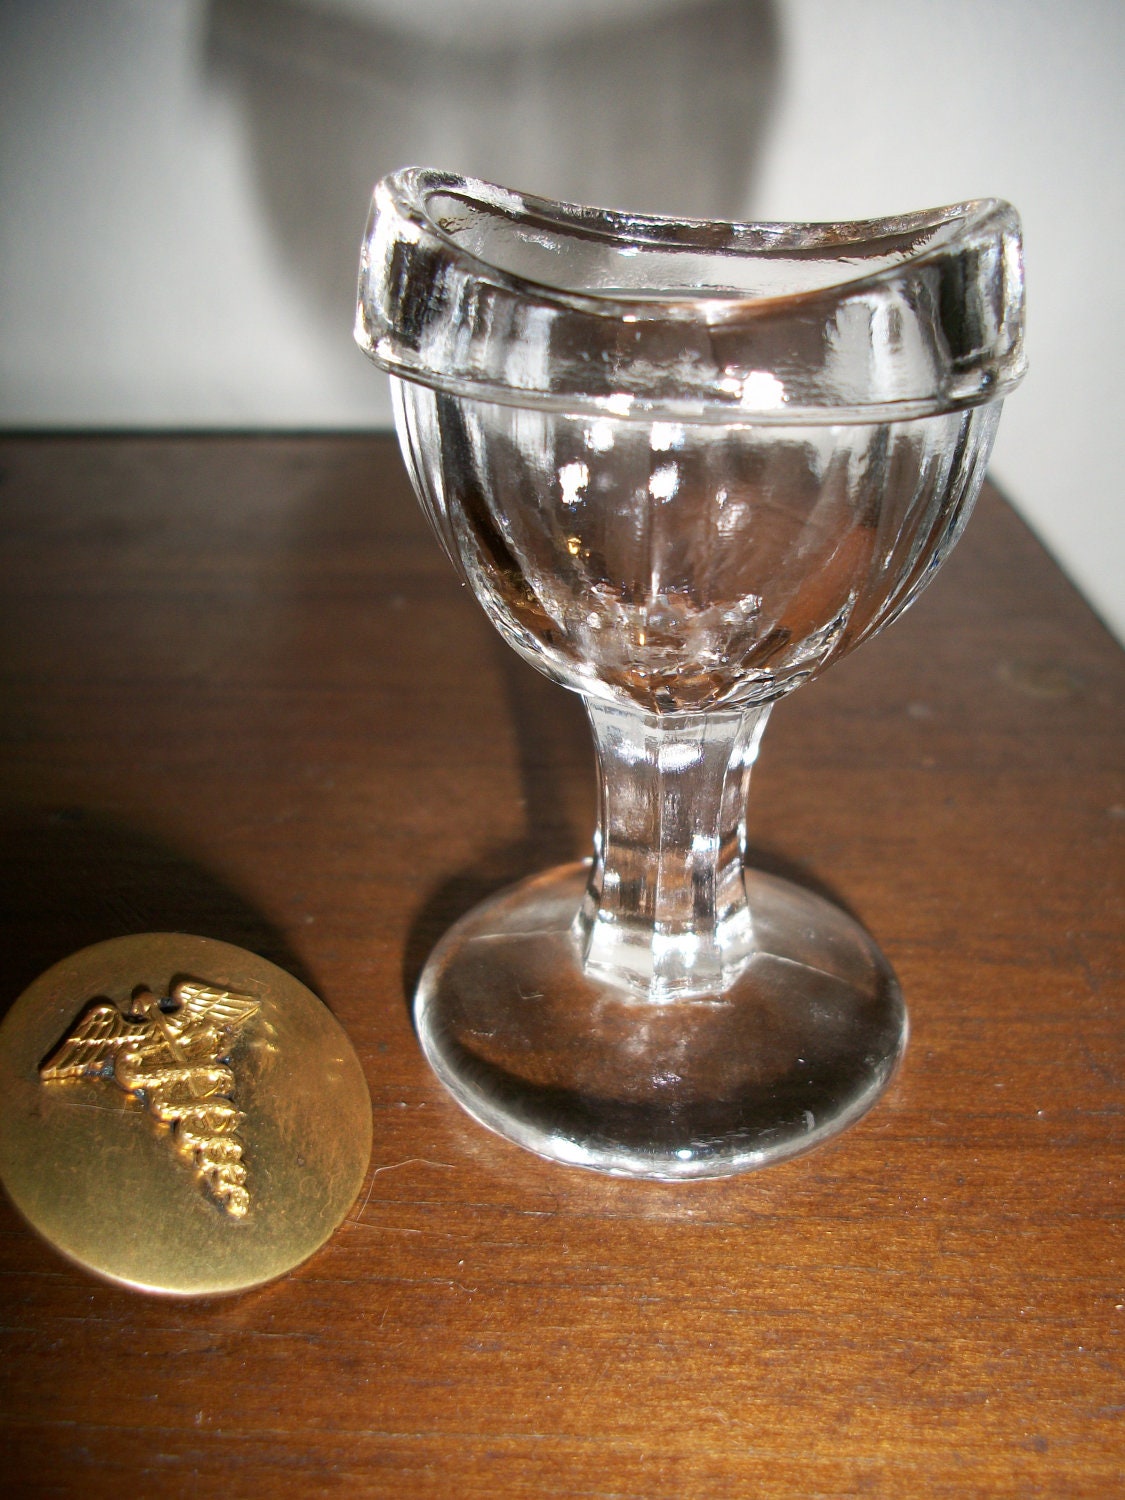 Items glass Etsy eye Wash Cup similar on cup Glass to vintage Eye Vintage